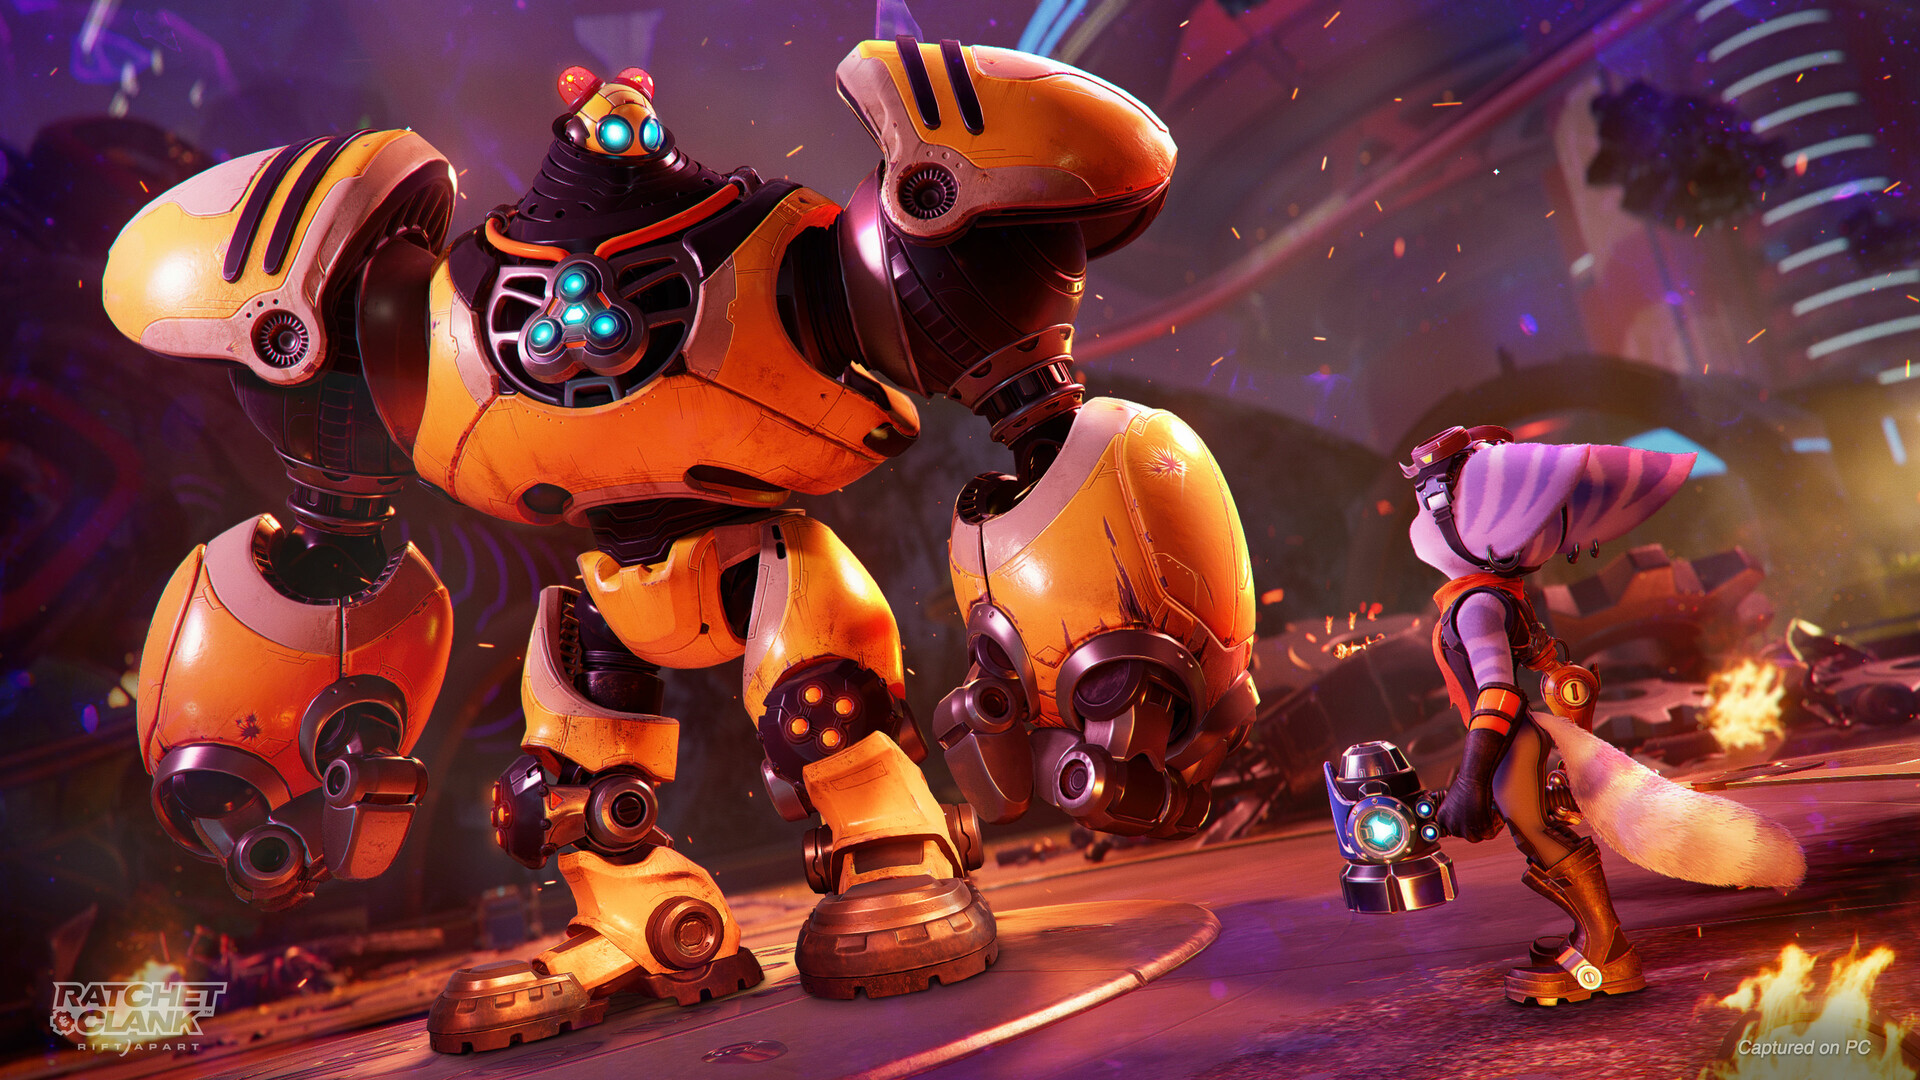 Ratchet & Clank: Rift Apart peaks at less than 9k concurrent players on  Steam, third worst PC launch for PlayStation game